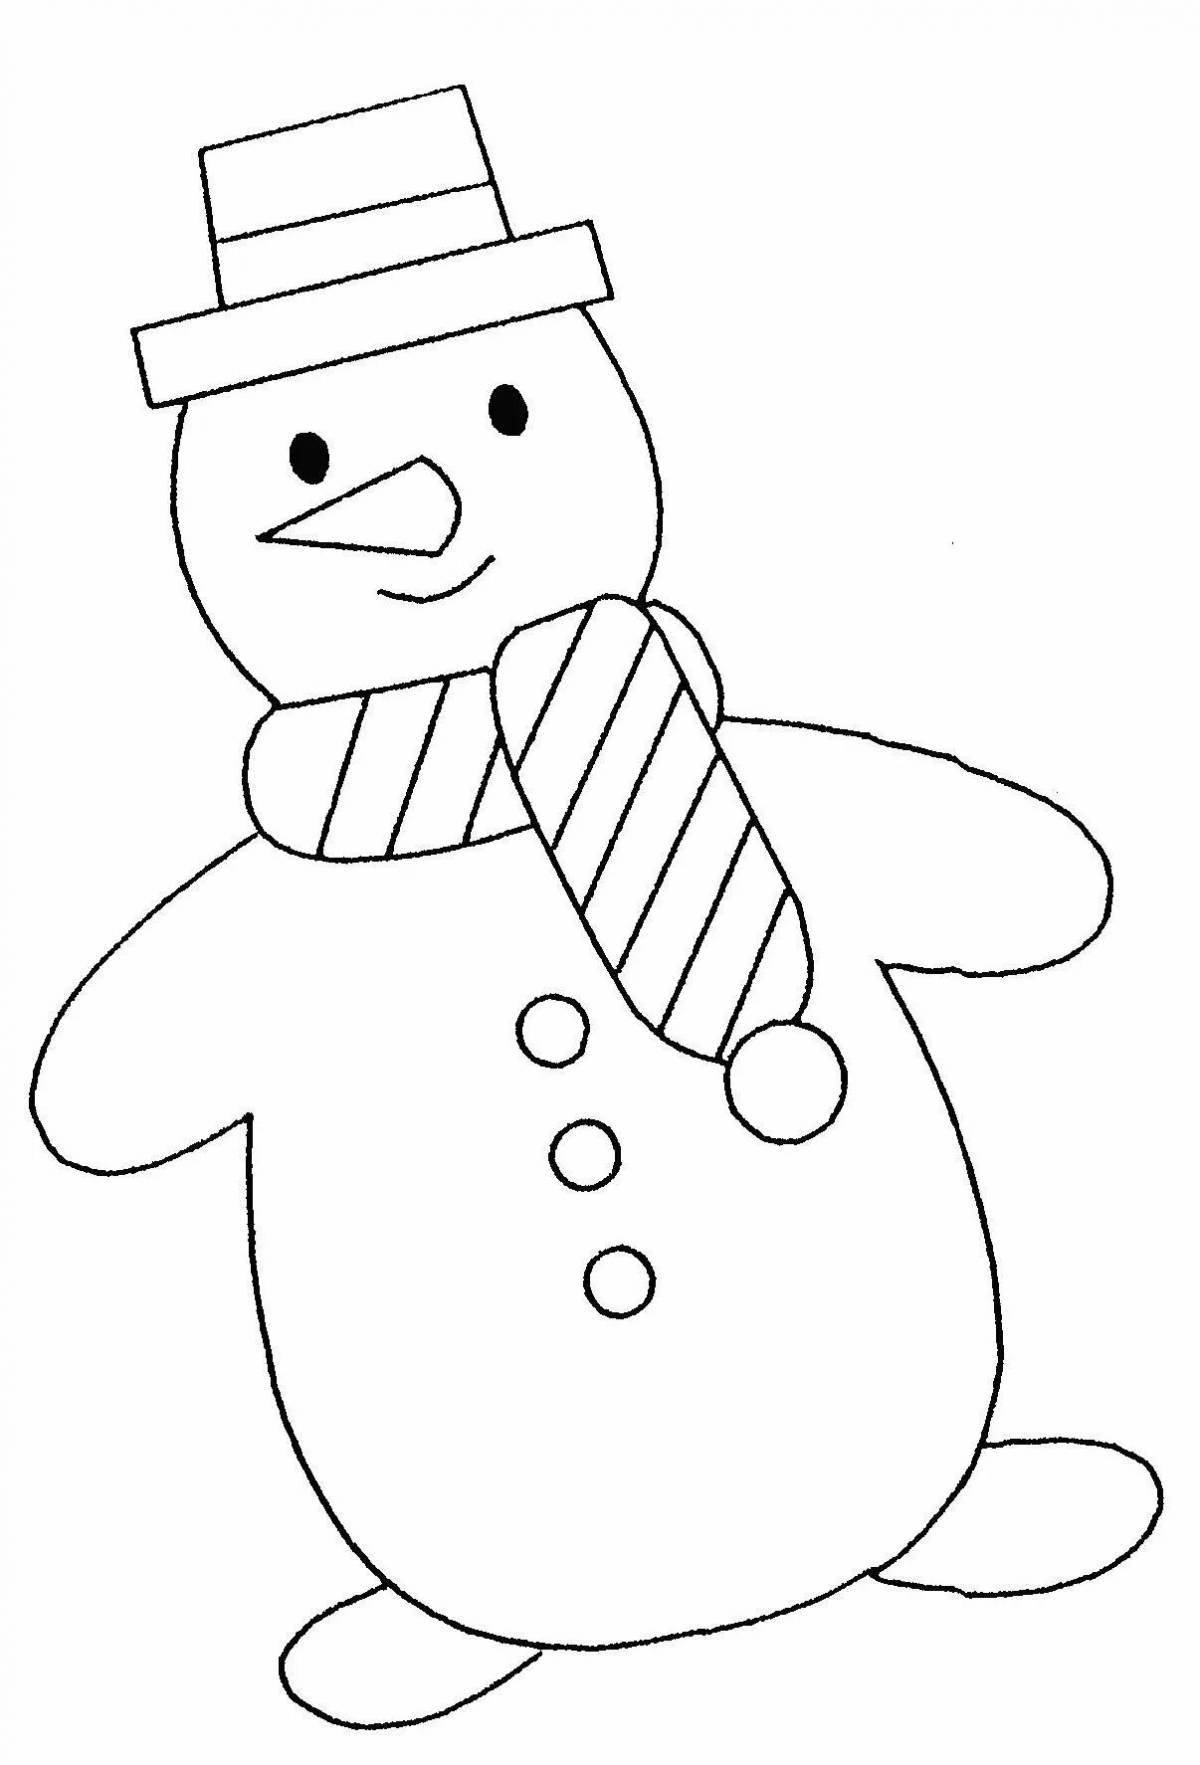 Fascinating snowman drawing for kids